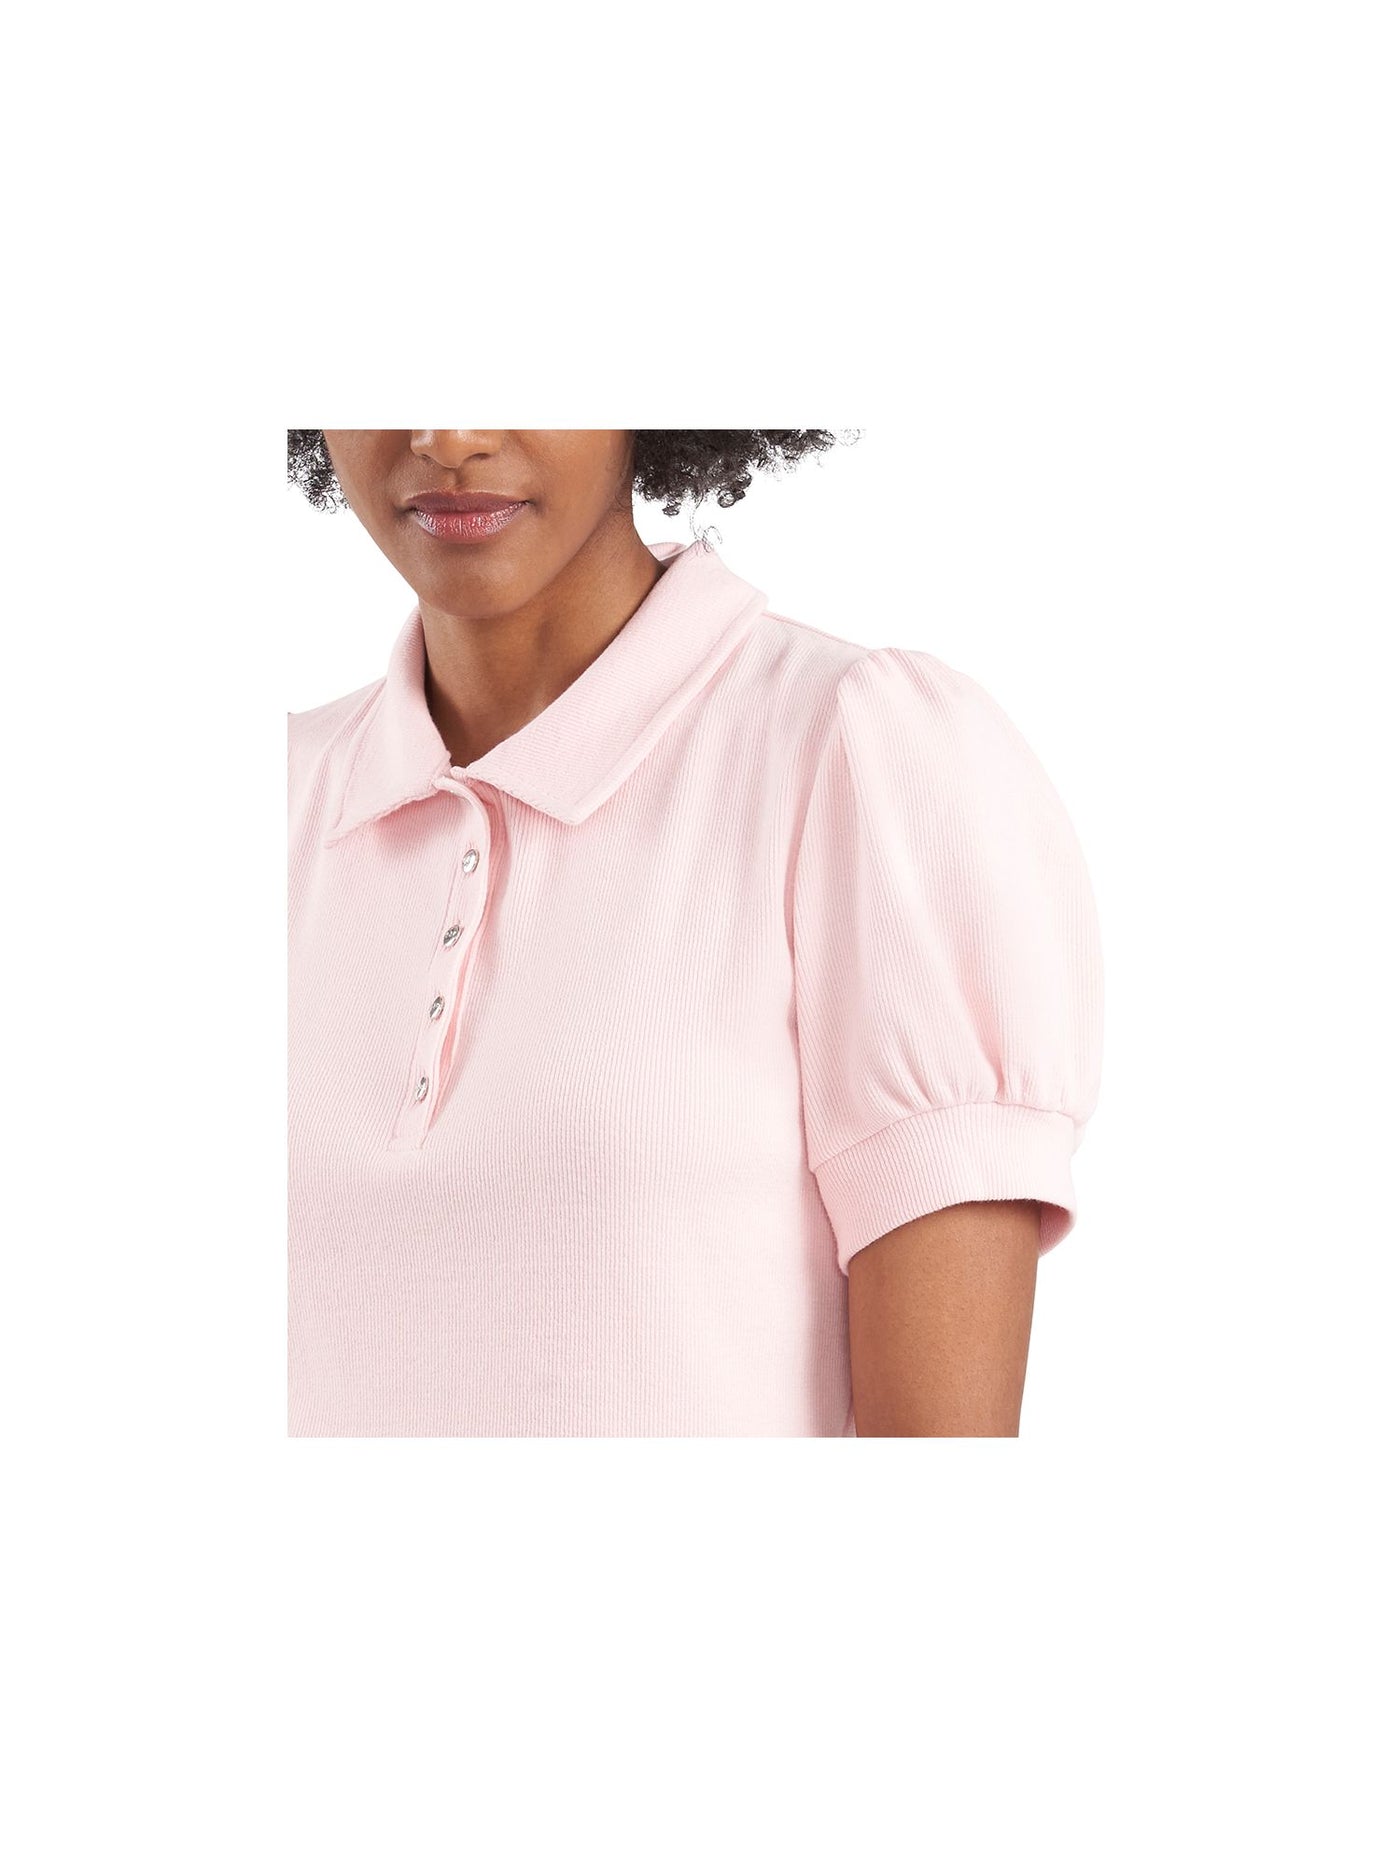 RILEY&RAE Womens Stretch Ribbed Polo Pouf Sleeve Collared Top